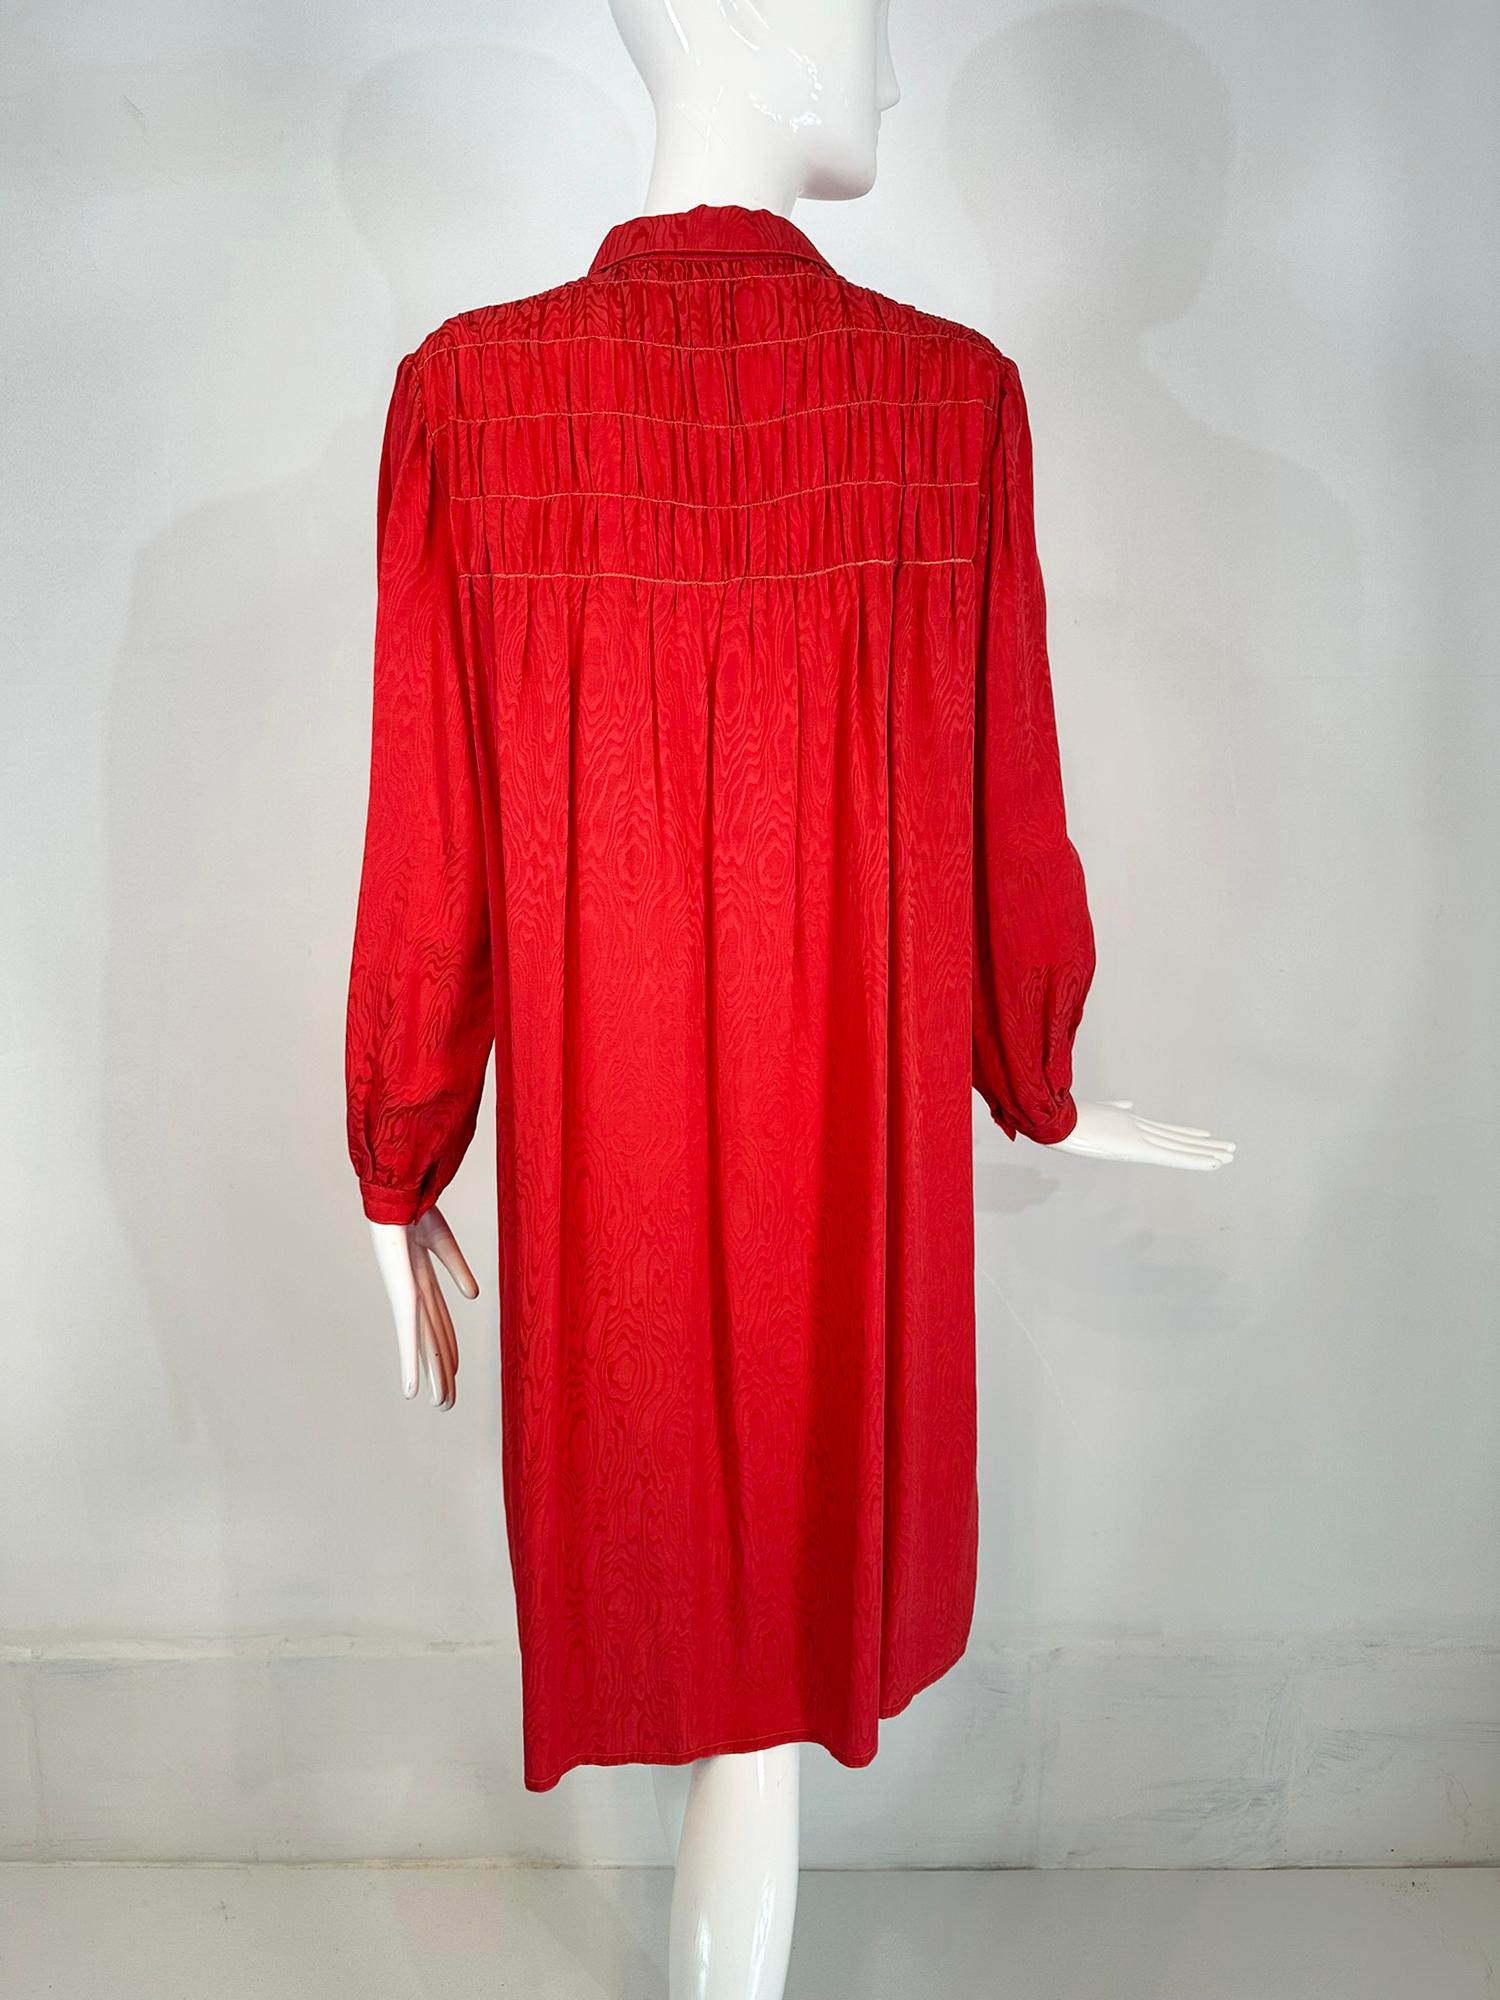 Geoffrey Beene Coral Red Silk Jacquard Smock Dress 1970s For Sale 3